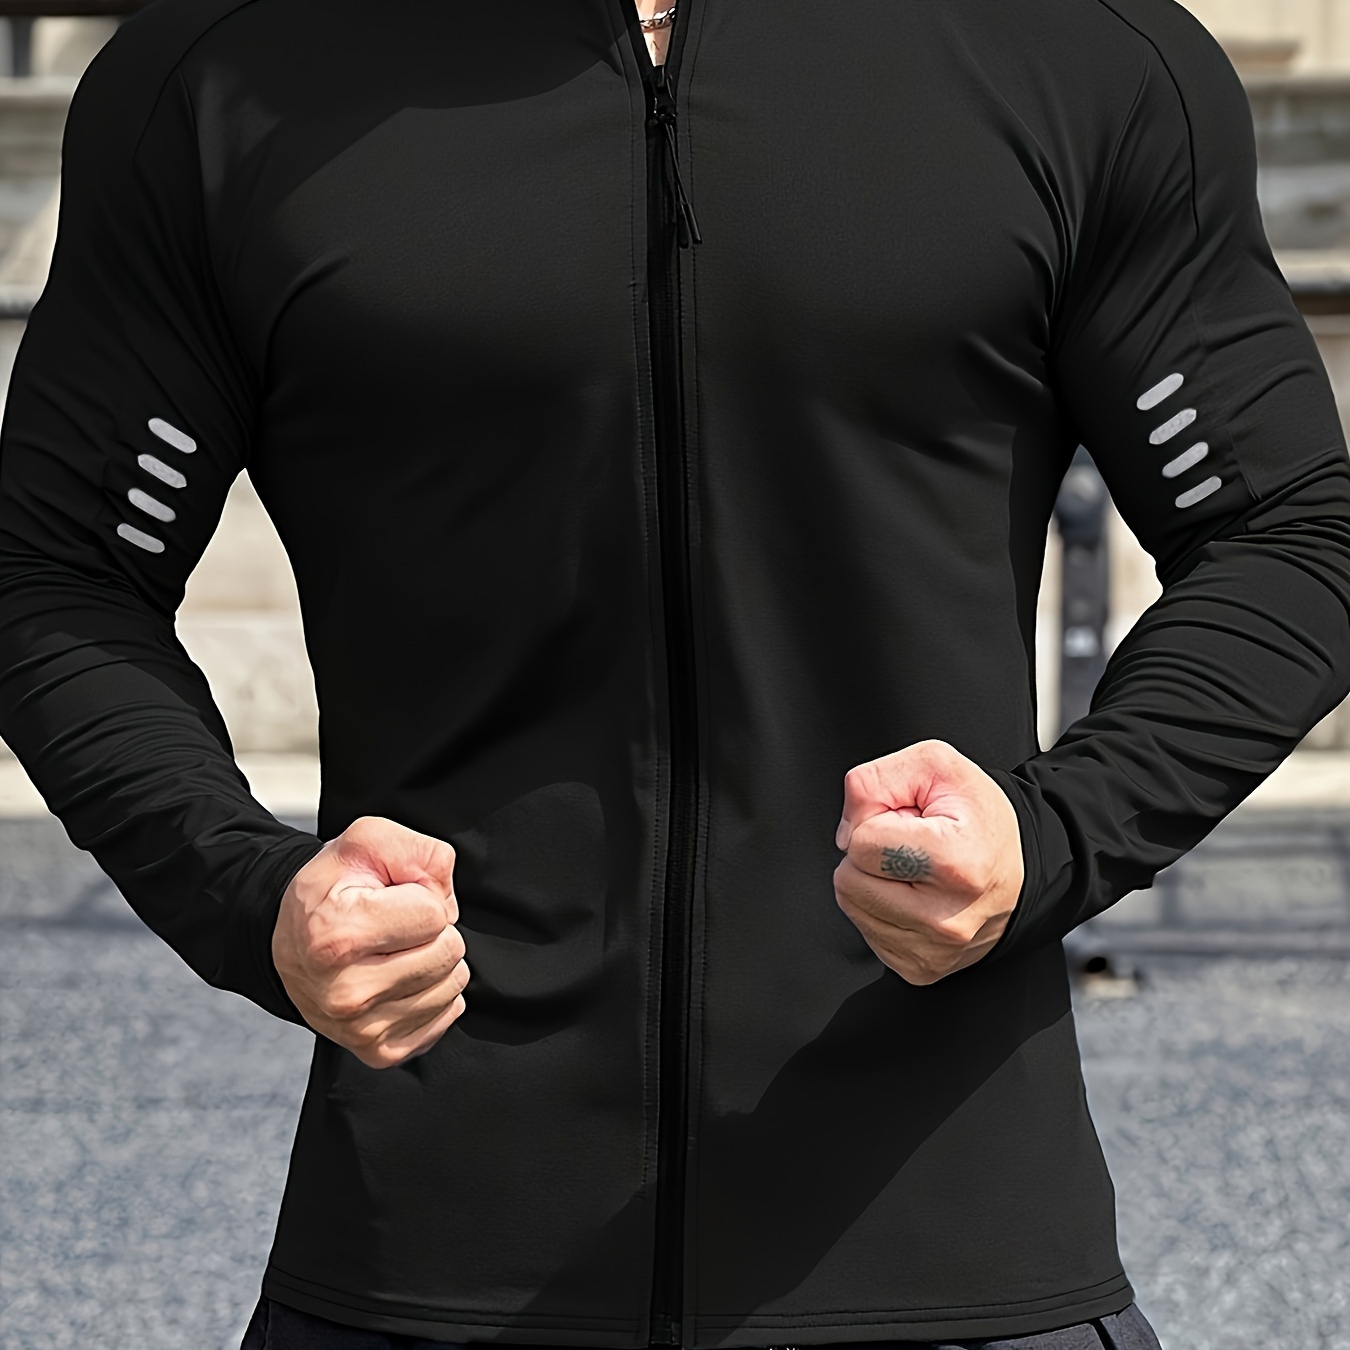 

Men's Sports Fitness Long Sleeve Shirt With Zipper, Breathable Basketball Training Top, Upf Sun Protection, Versatile Athletic Wear